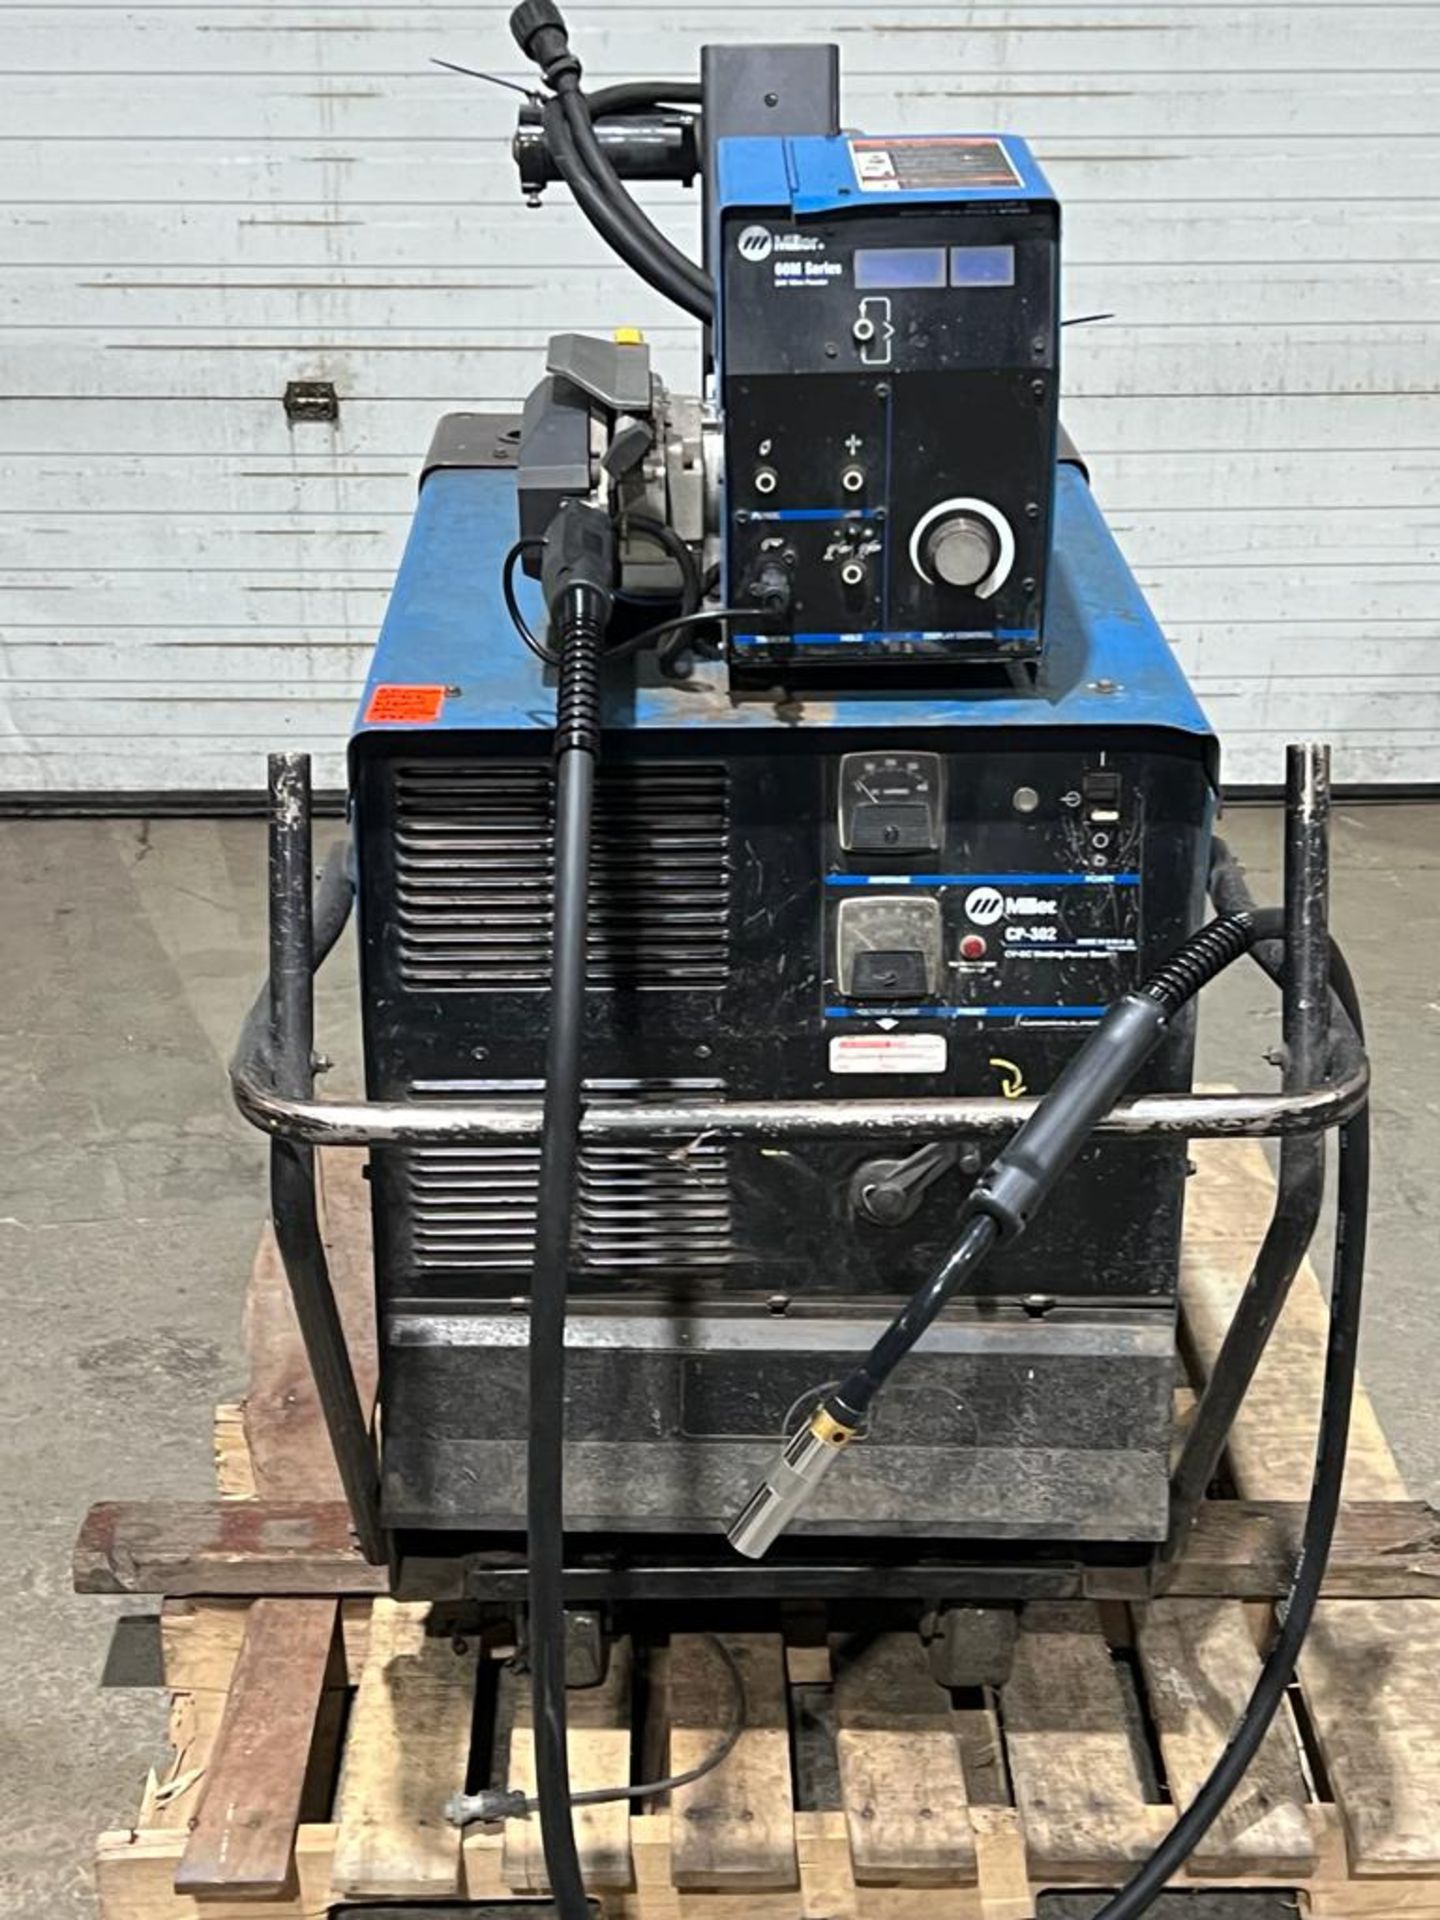 Miller CP-302 Mig Welder 300 Amp Mig with 60 Series 4-Wheel Wire Feeder with Mig Gun and cables